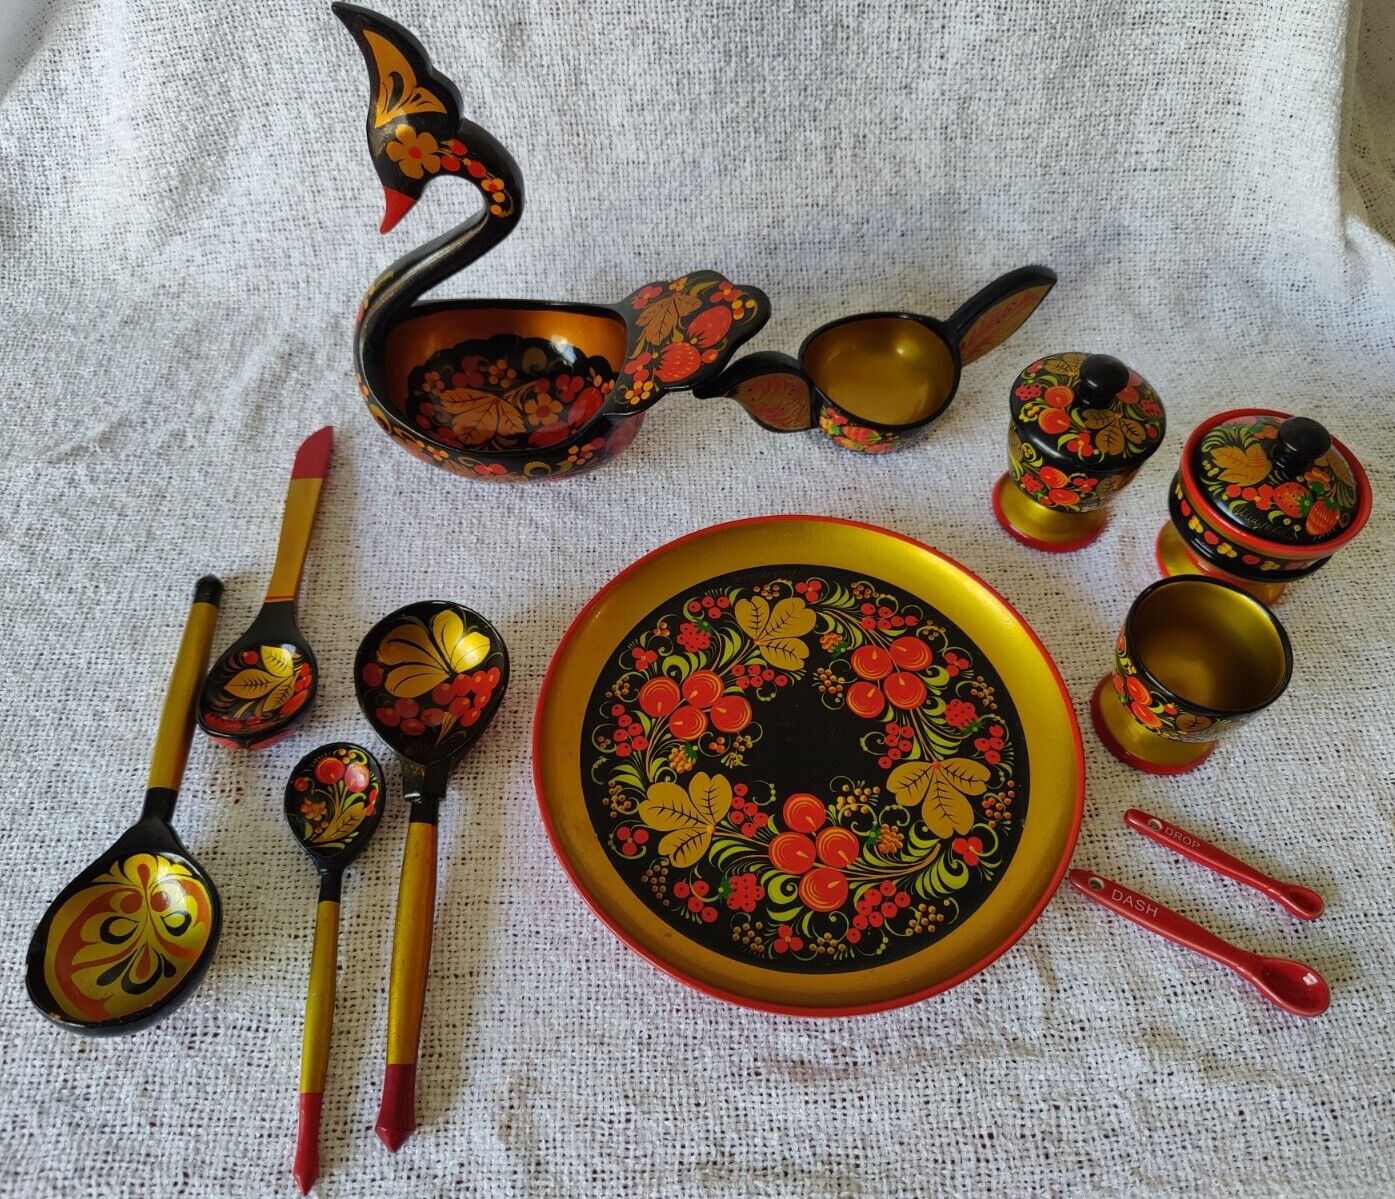 14 Pieces Vintage Russian KHOKHLOMA Hand Painted Wood Laquer (USSR) Folk Art 